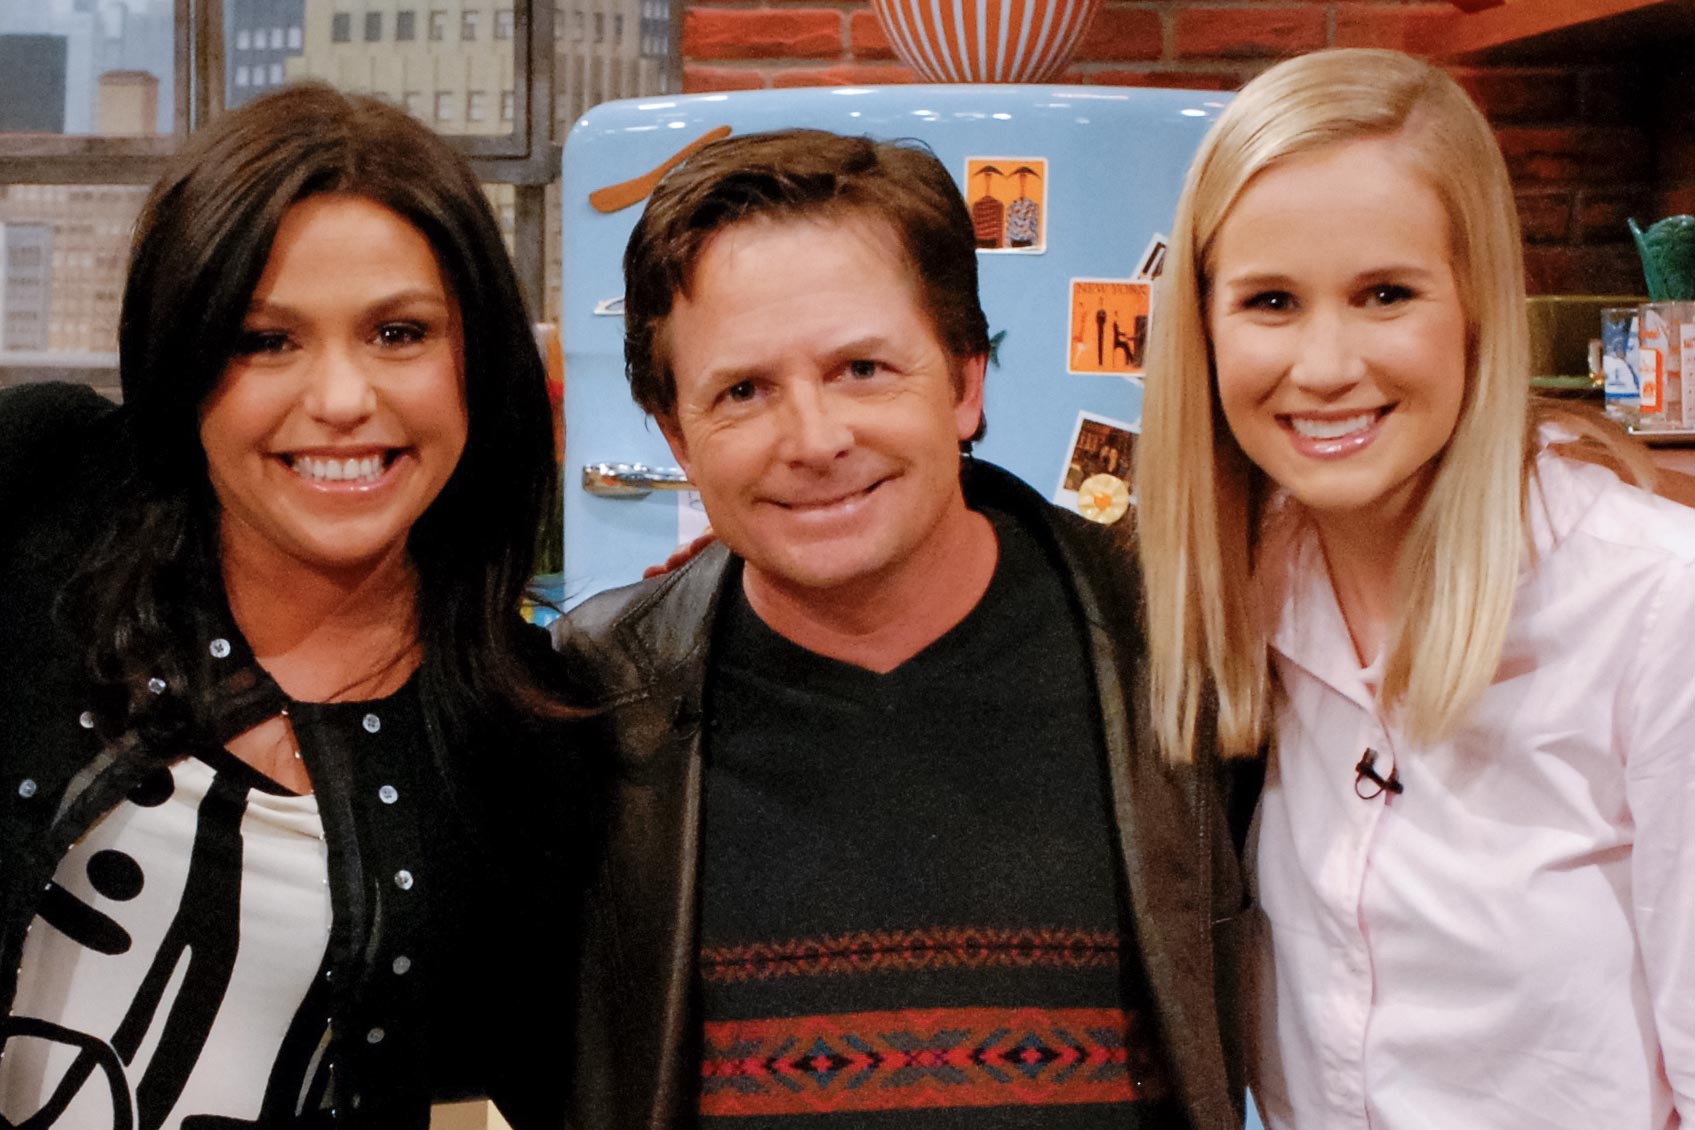 Rachael Ray, left, featured Mary Yonkman, right,  Michael J. Fox, center pose together for a picture